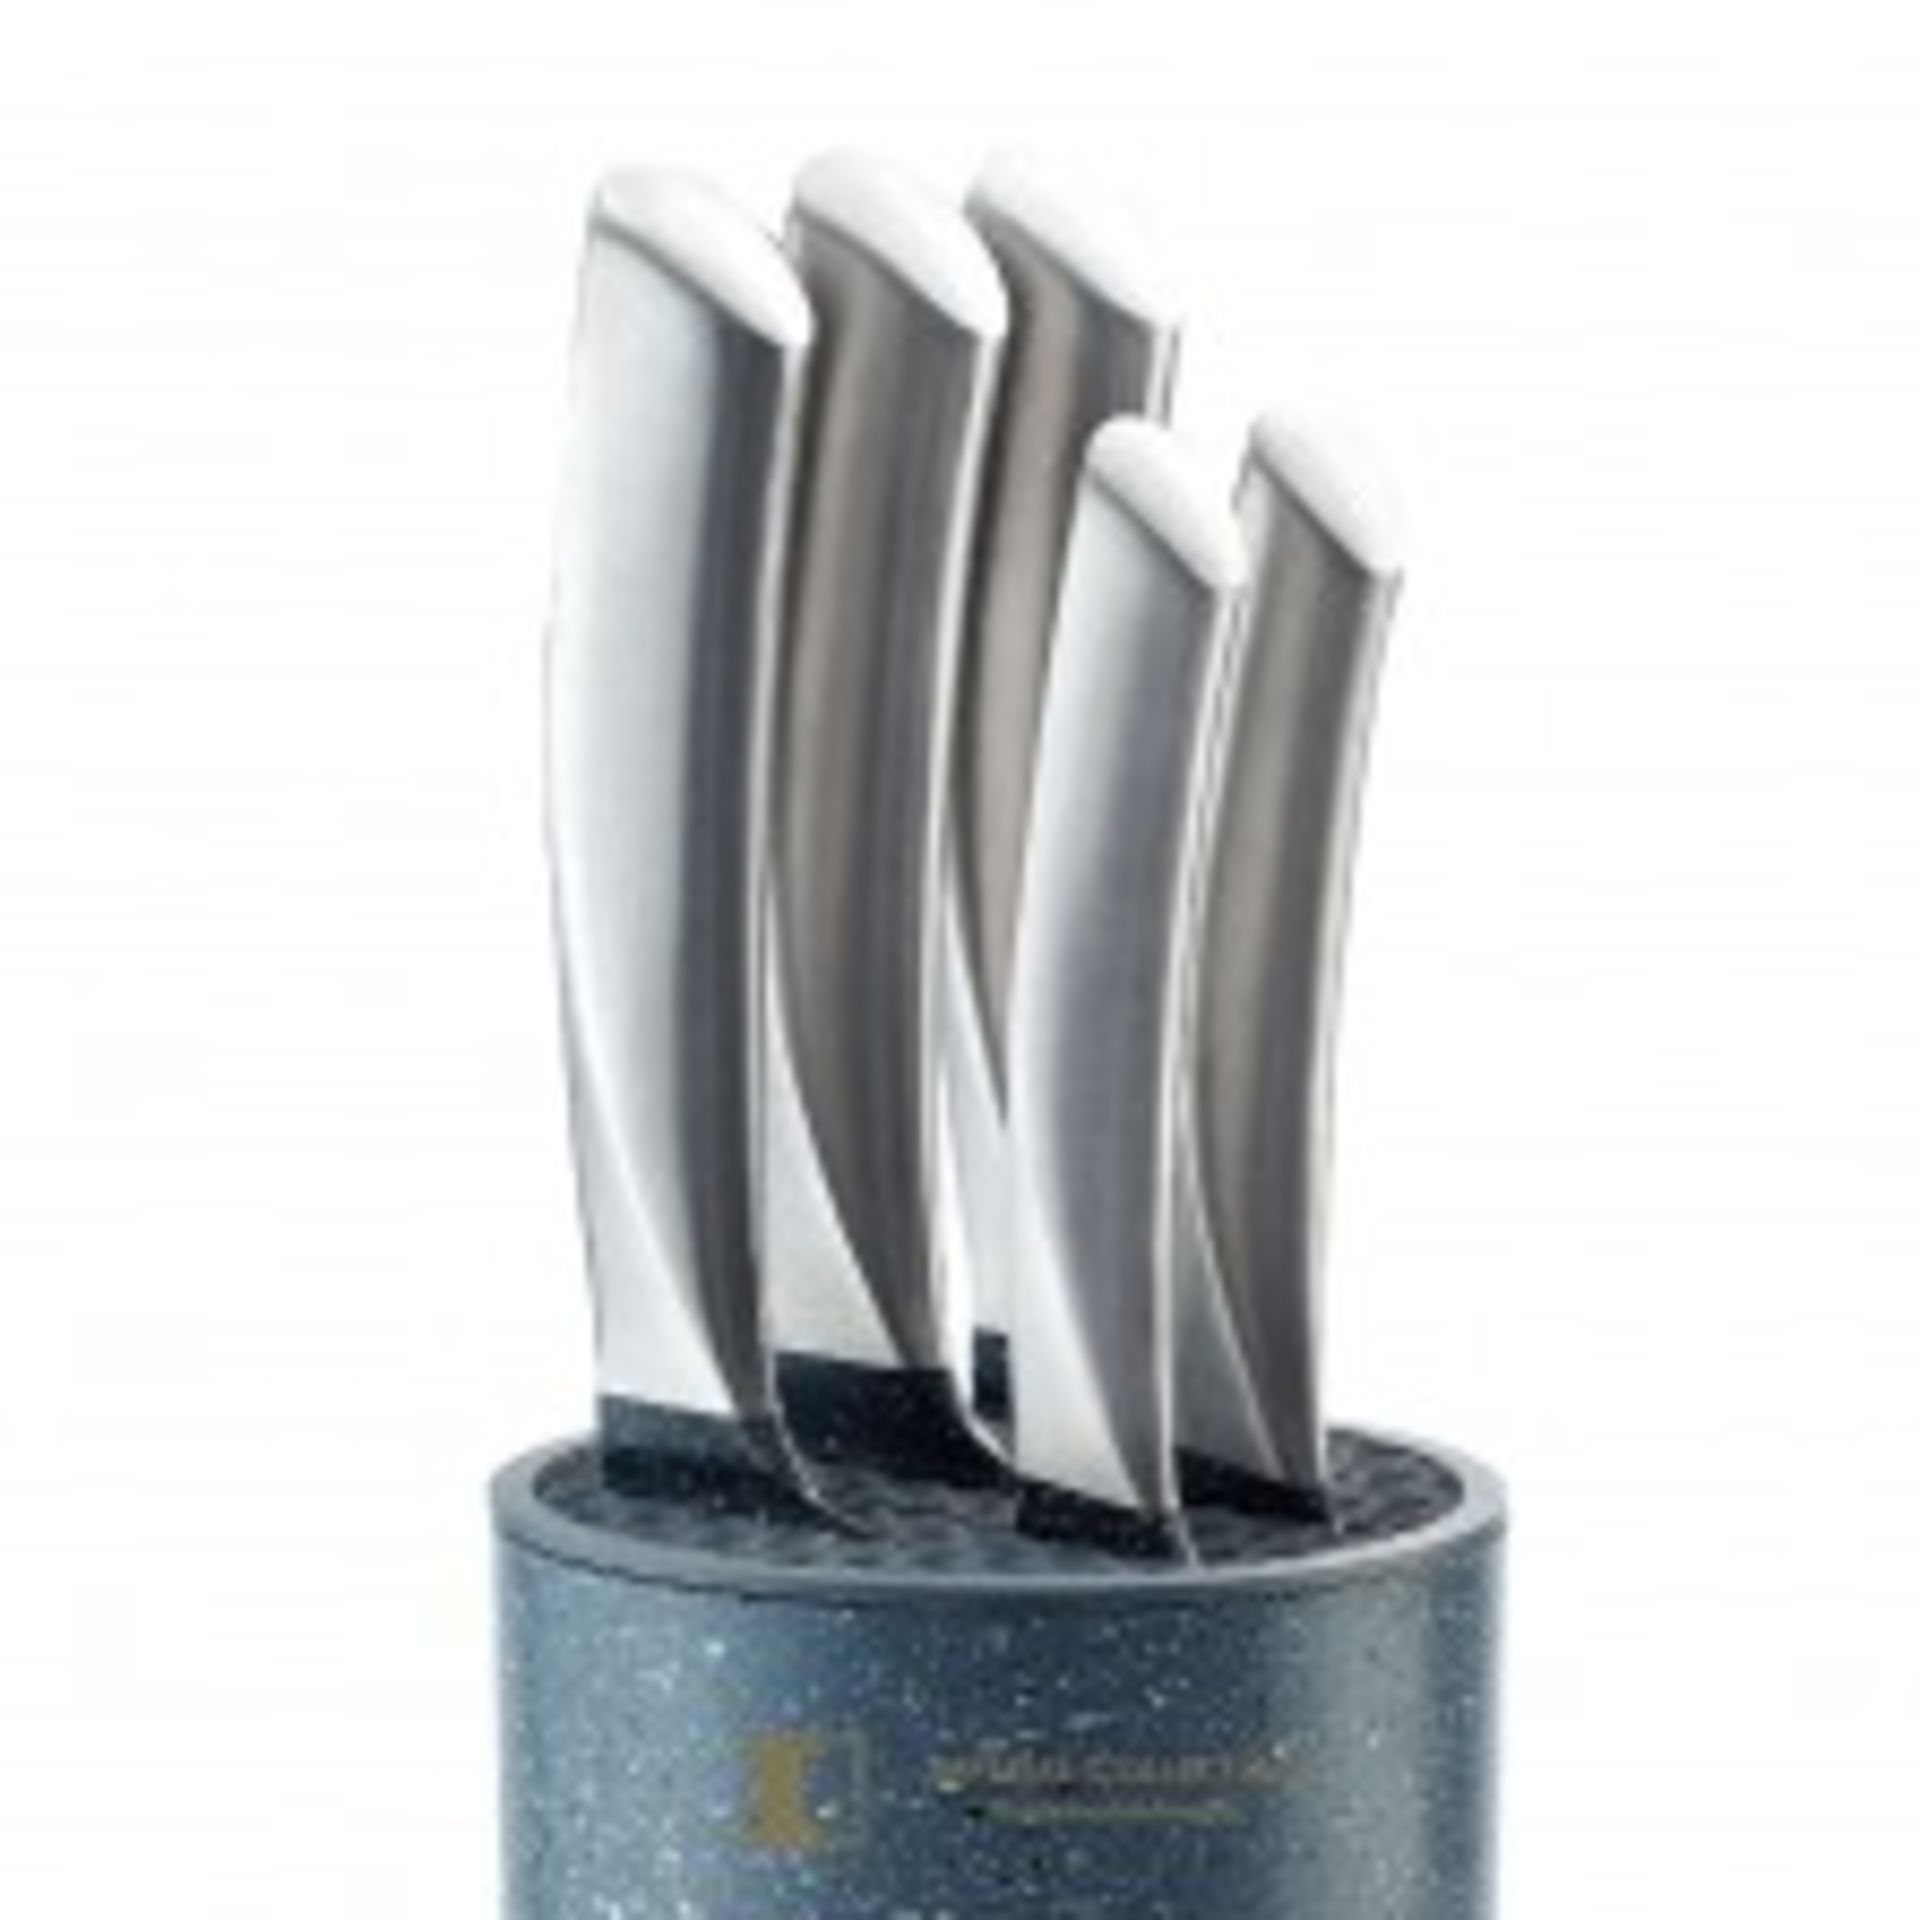 V Brand New Stainless Steel with Marble coating Knife Set In grey marble stlye Holder Includes 6" - Image 4 of 4